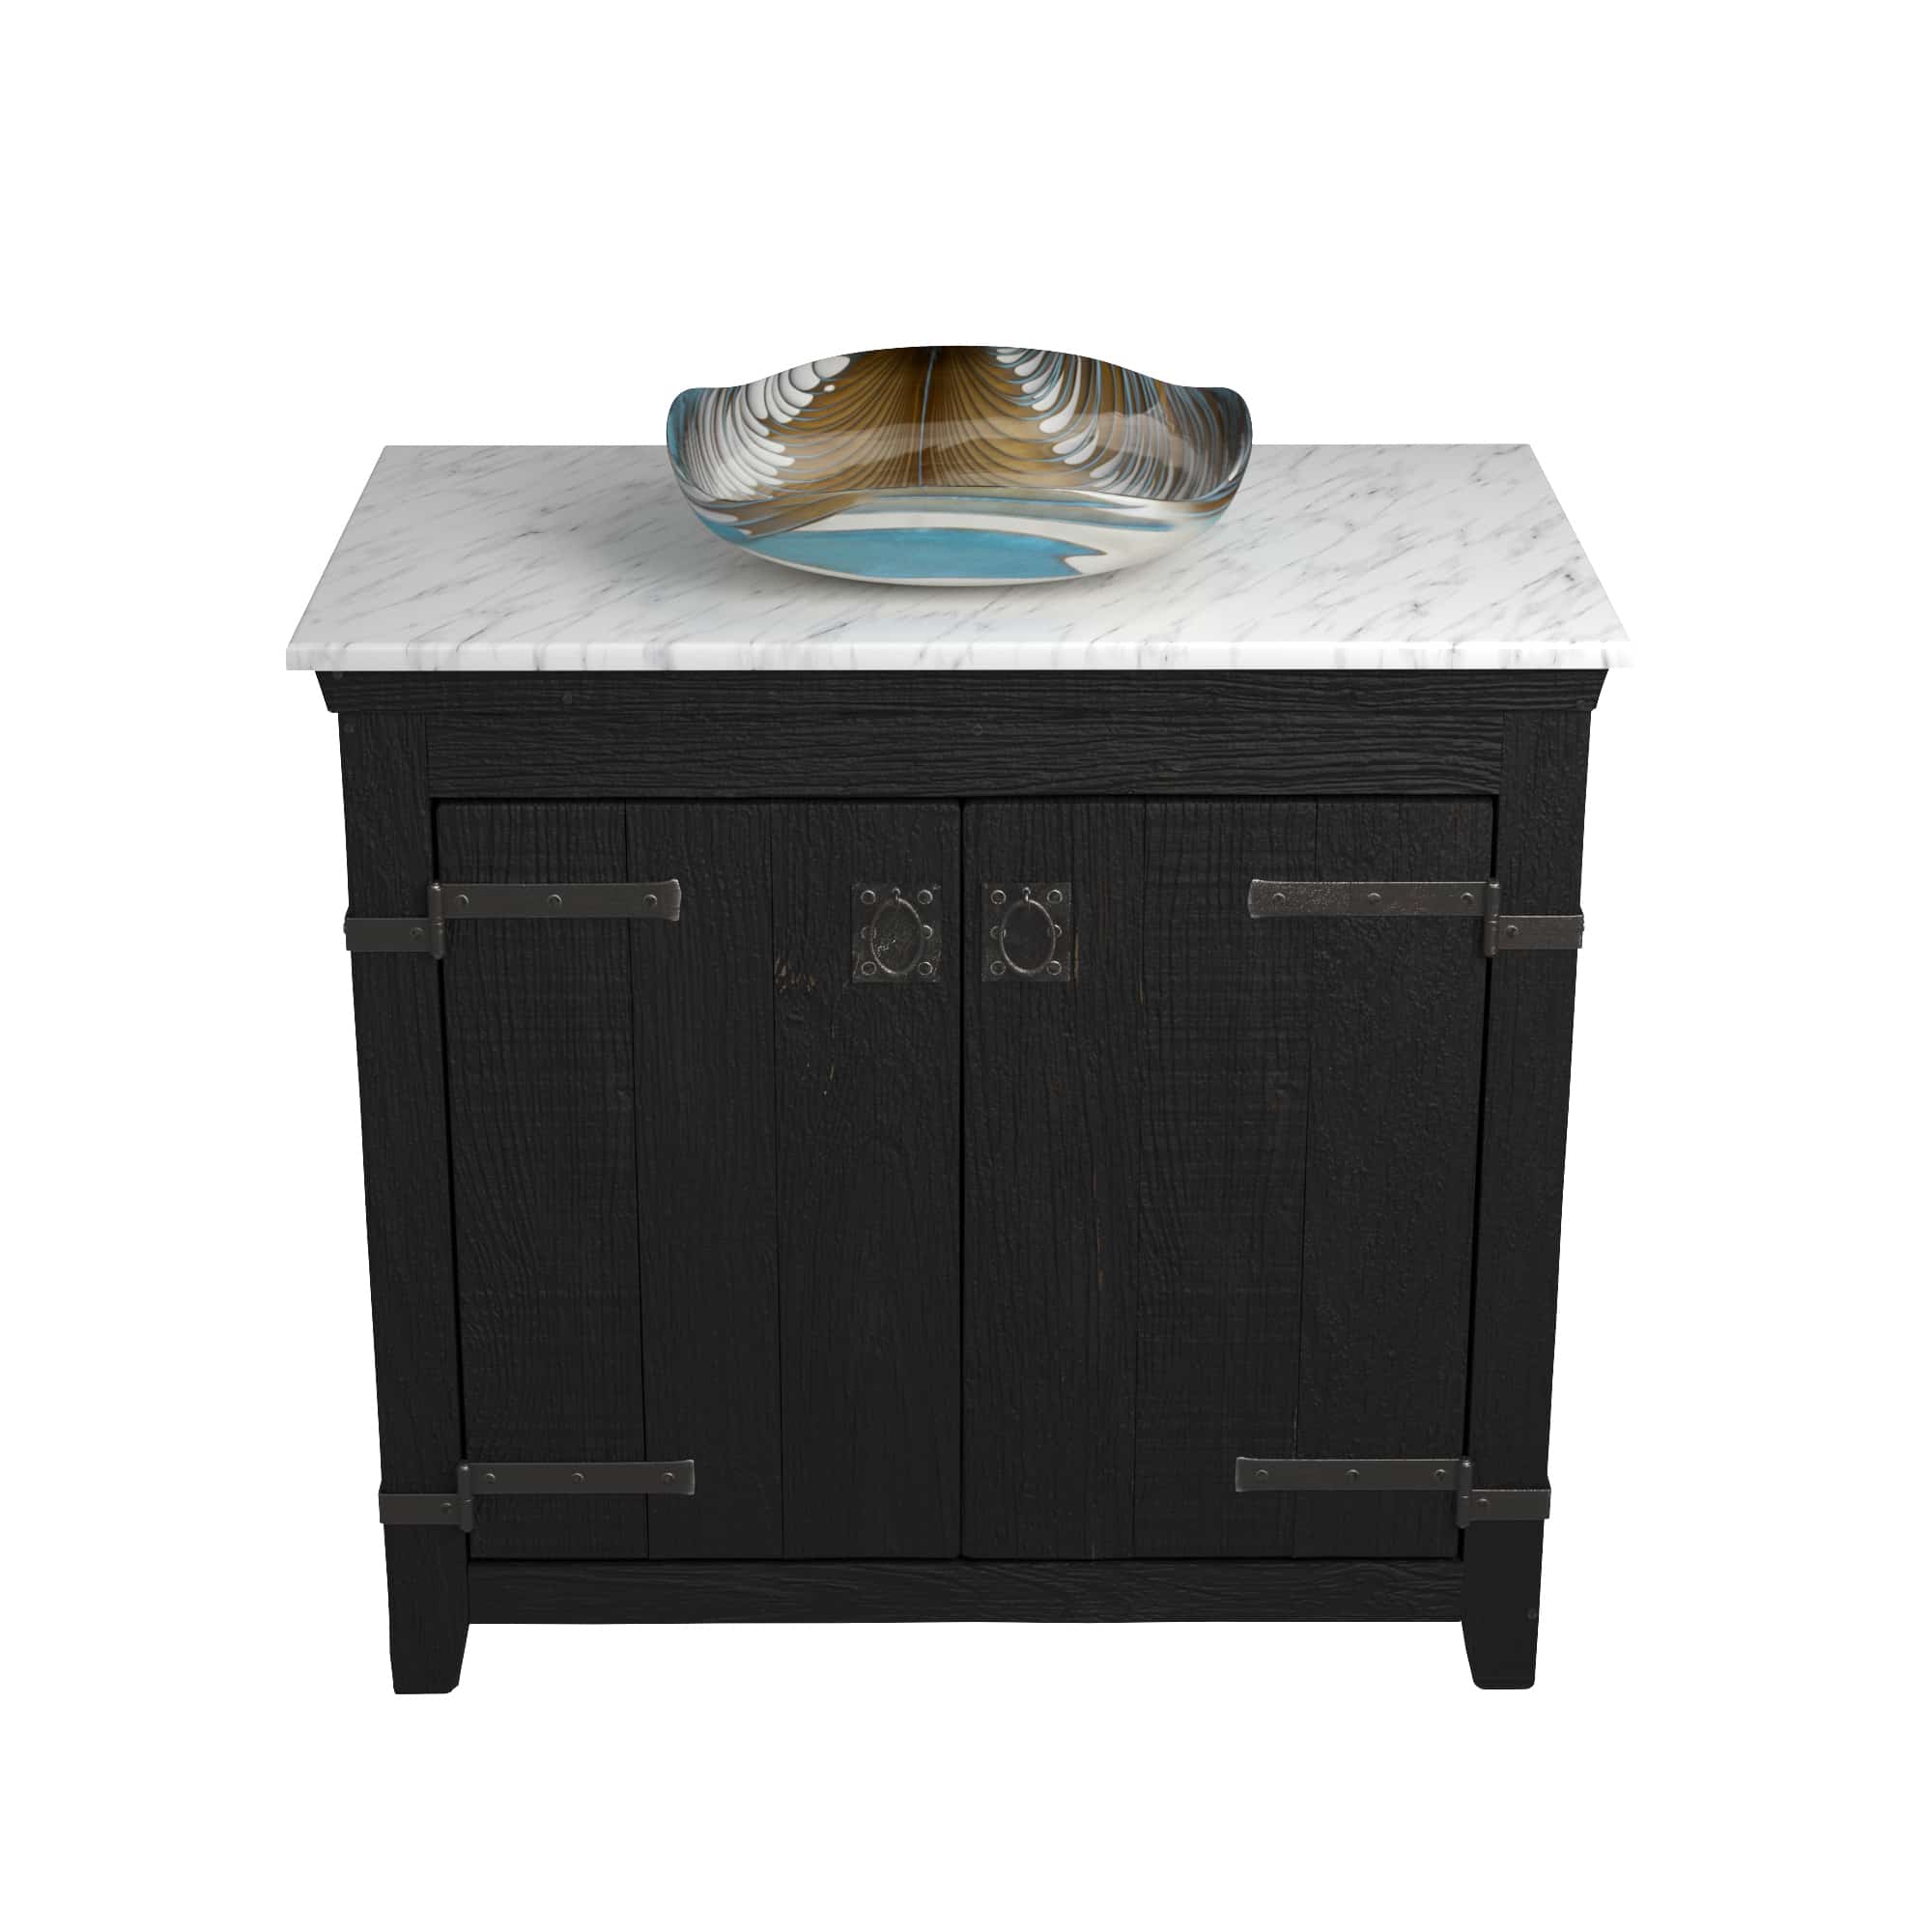 Native Trails 36" Americana Vanity in Anvil with Carrara Marble Top and Lido in Shoreline, Single Faucet Hole, BND36-VB-CT-MG-029